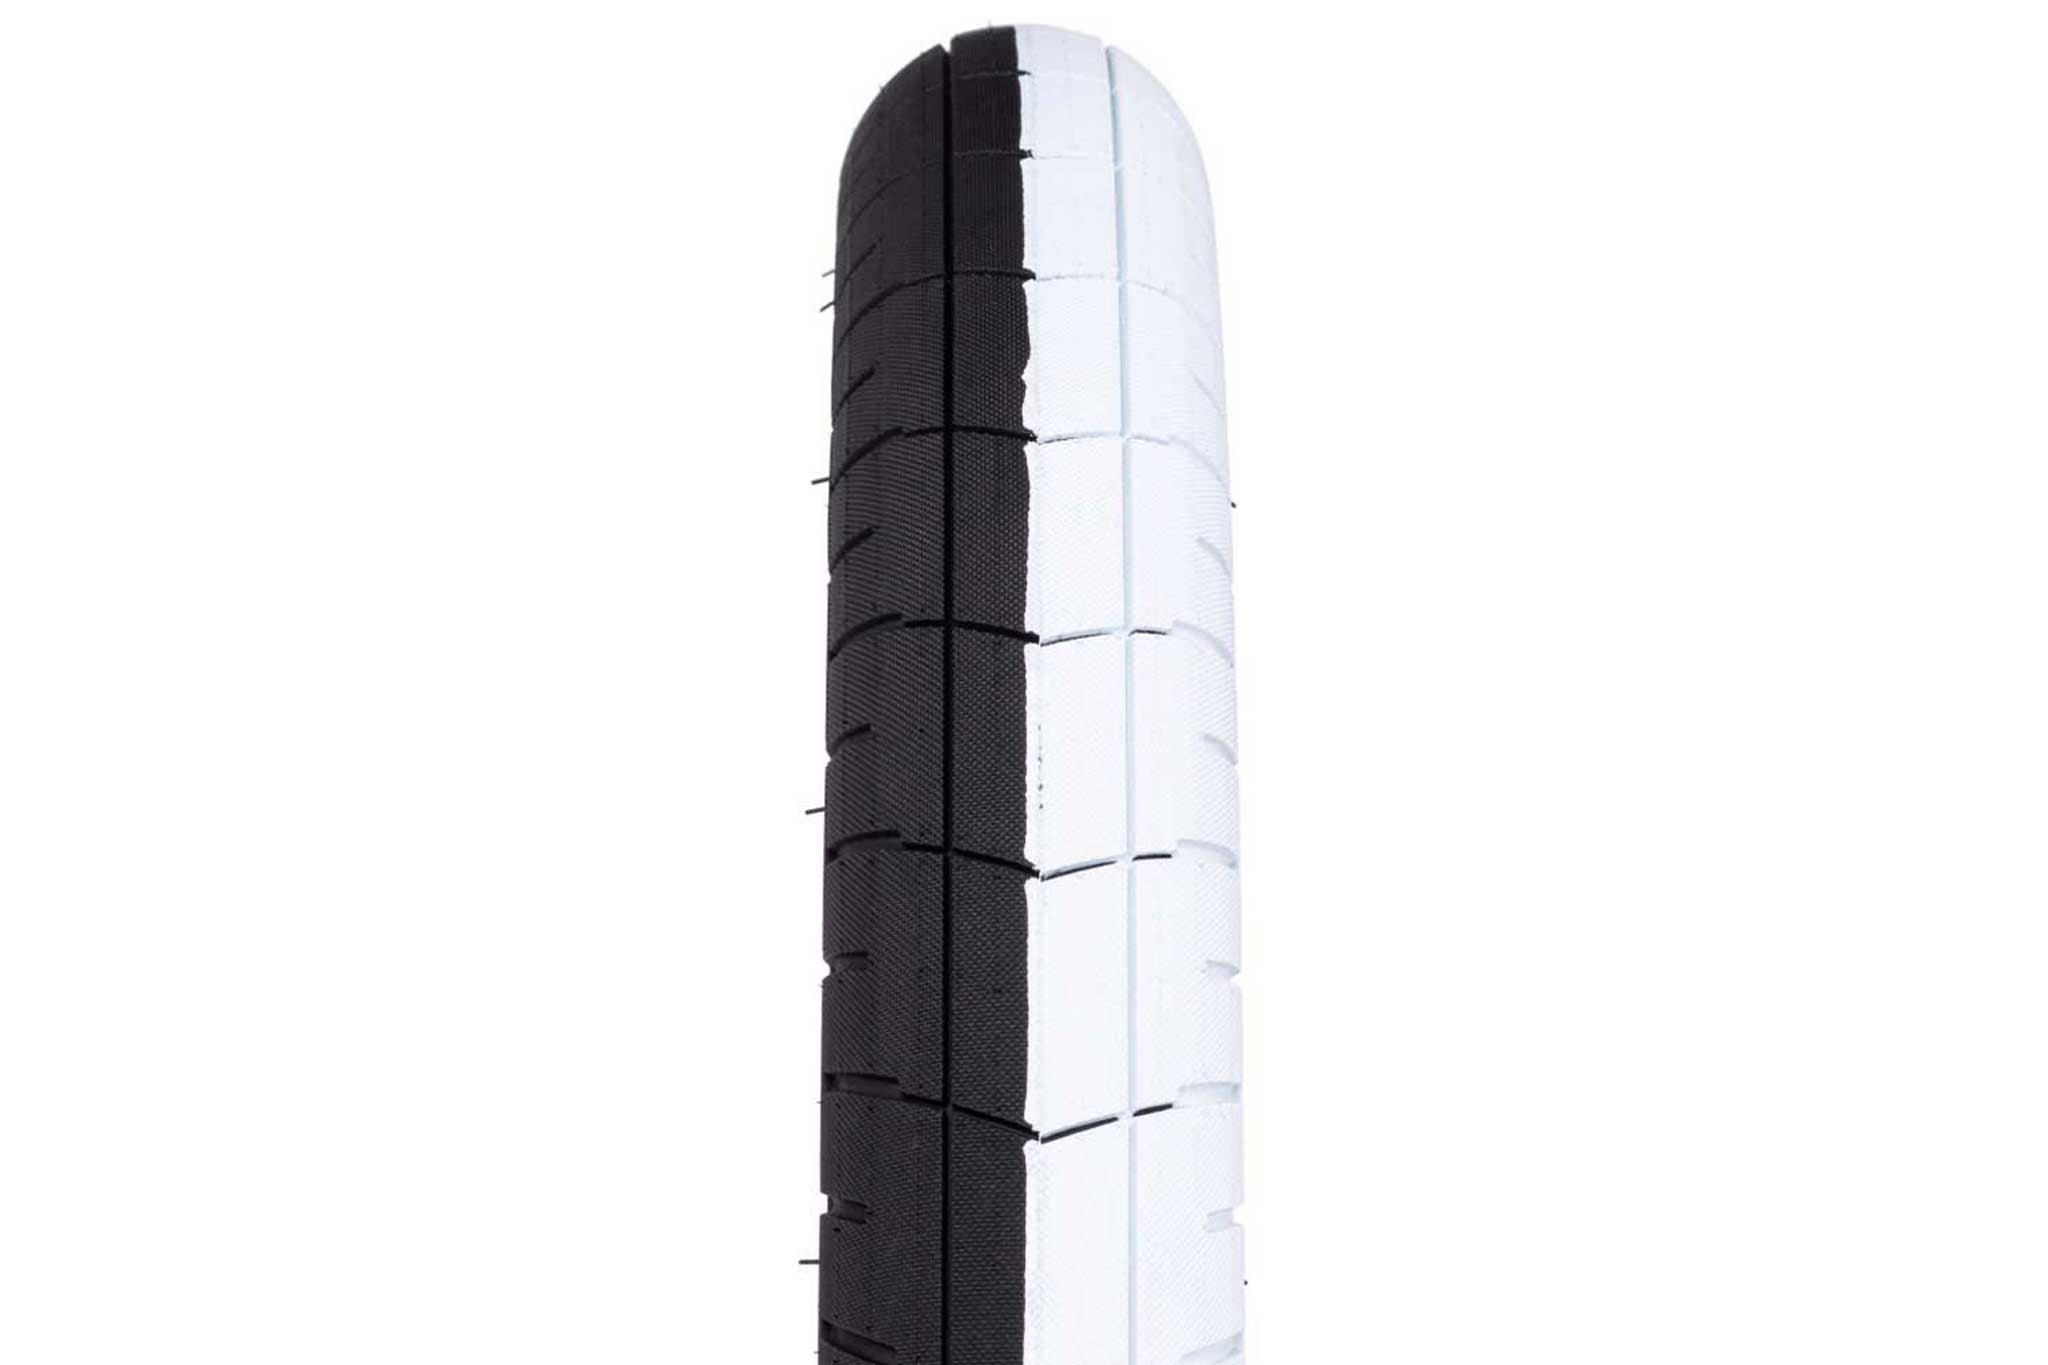 Wethepeople Activate Tyre - 100psi rated - 2.35- Black/White